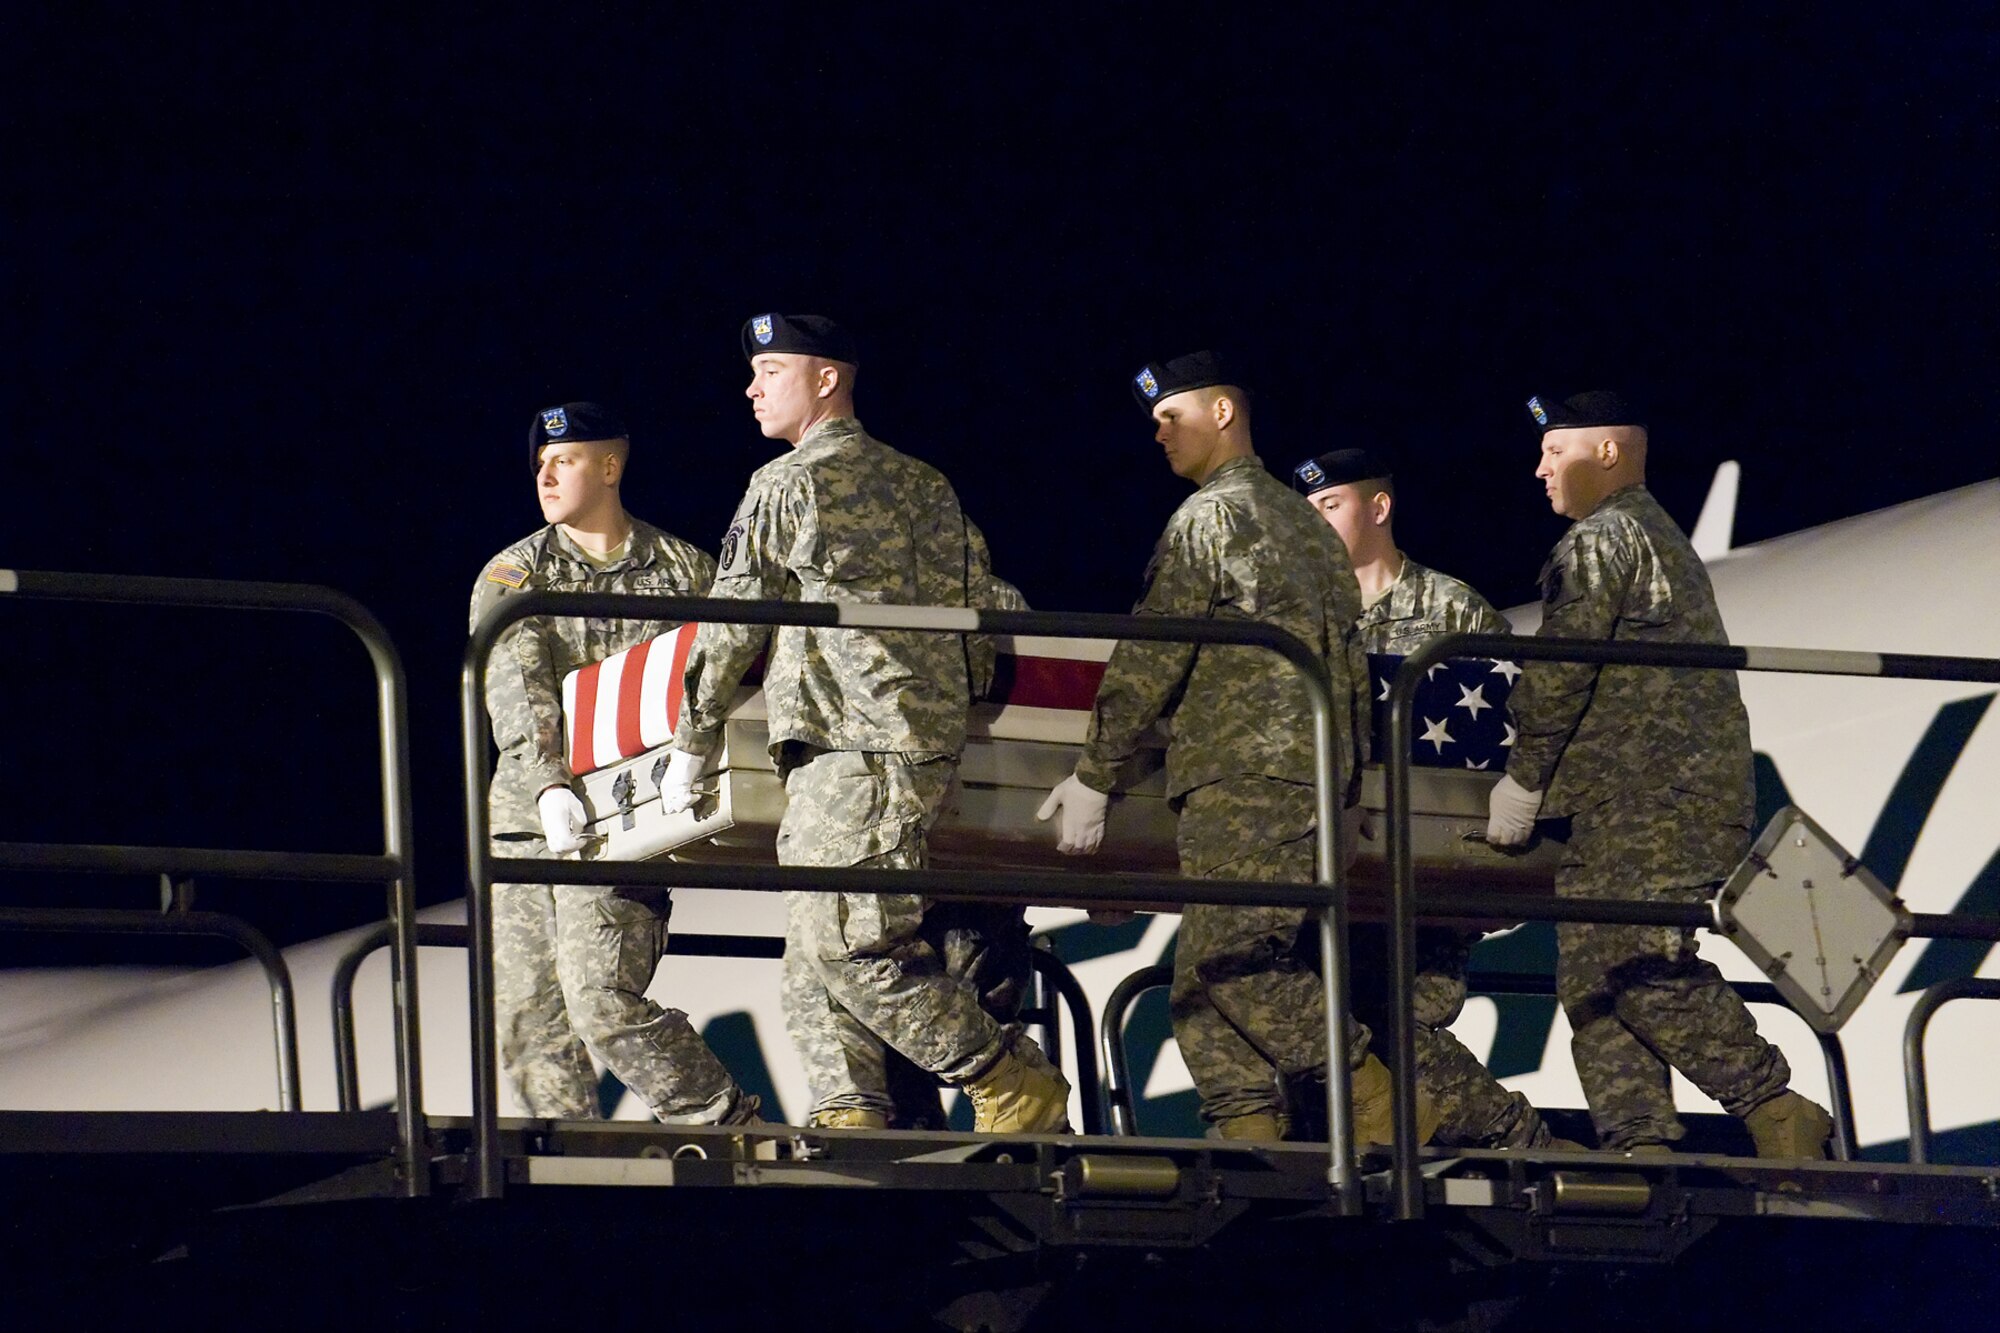 A U.S. Army carry team transfers the remains of Army Spc. Lakeshia M. Bailey, of Columbus, Ga., at Dover Air Force Base, Del., March 10. Spc. Bailey was assigned to 203rd Brigade Support Battalion, attached to the 1st Battalion, 10th Field Artillery Regiment, 3rd Brigade Combat Team, 3rd Infantry Division, Fort Benning, Ga. (U.S. Air Force photo/Roland Balik)